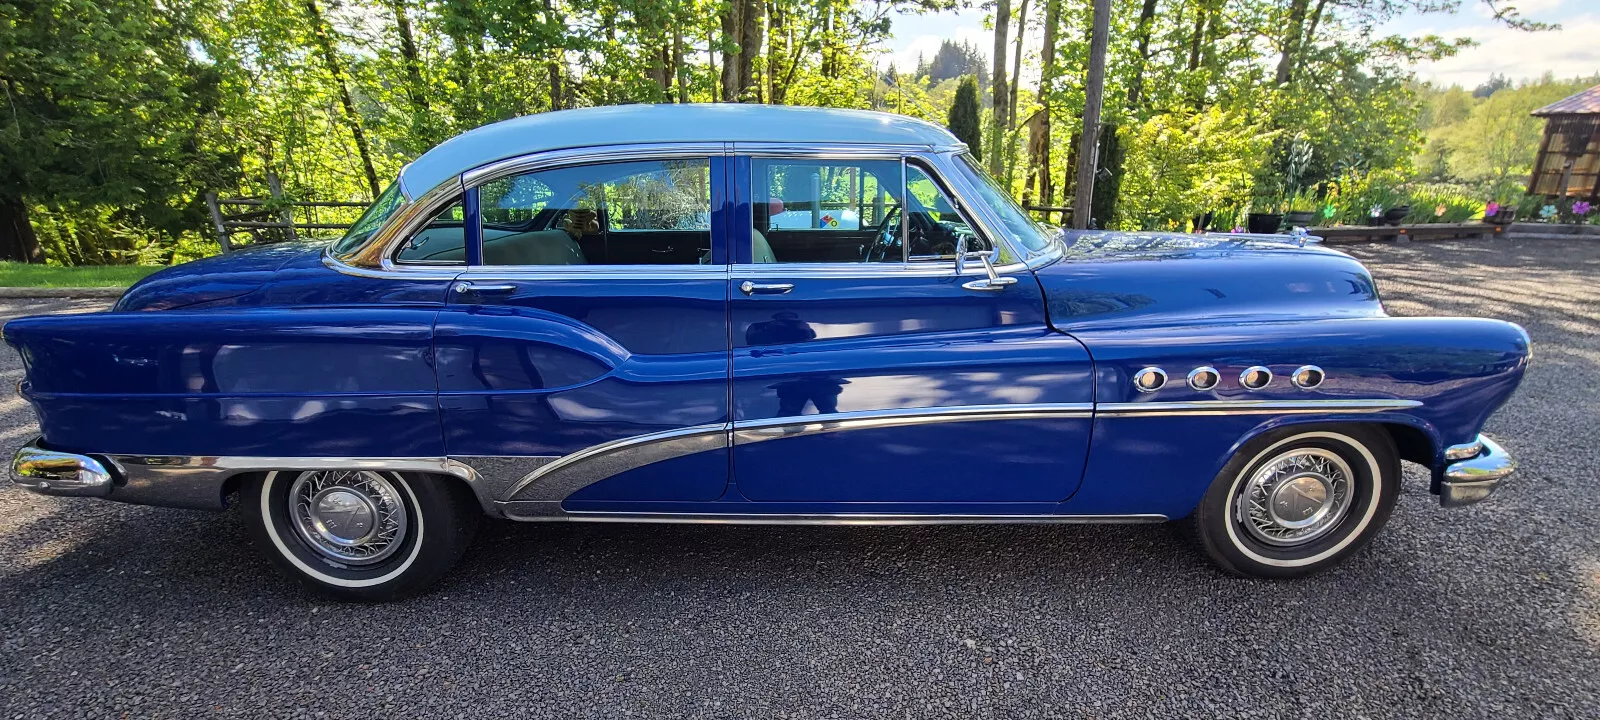 1953 Buick Roadmaster All trim is There, Attached and in Excellant Condition ! for sale